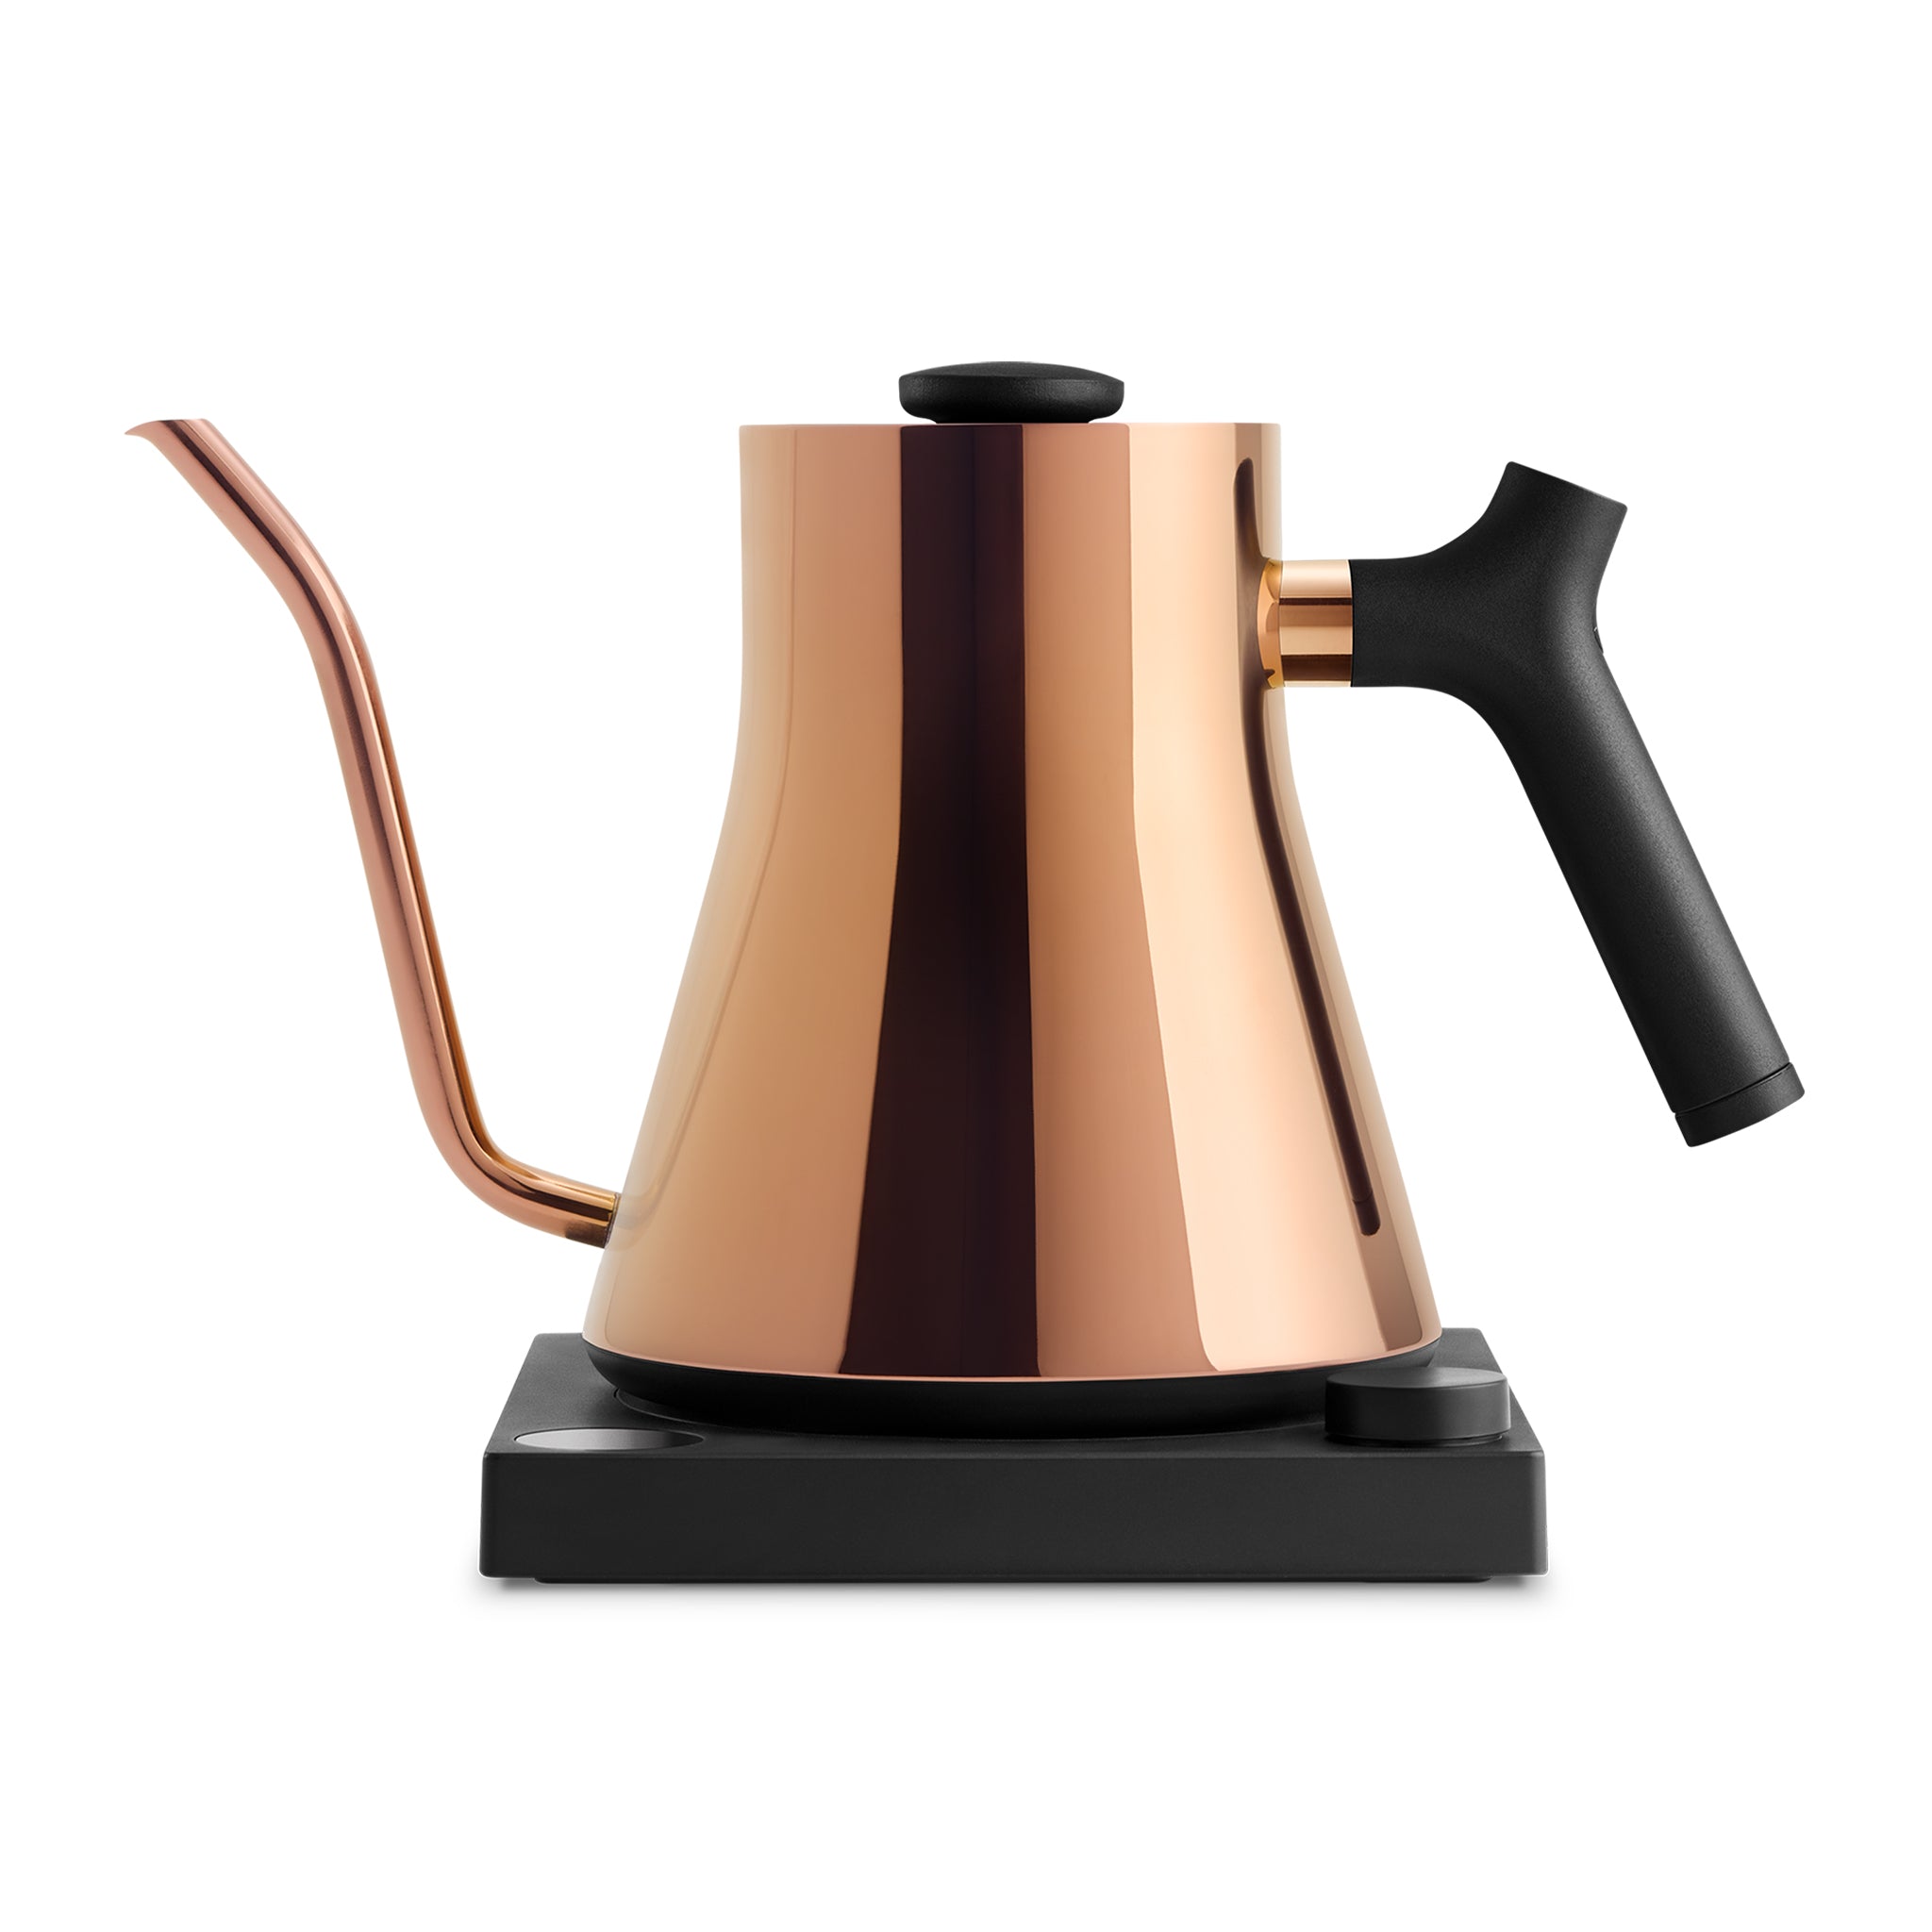 Your pour-over perfected with the Fellow Stagg EKG Electric Kettle